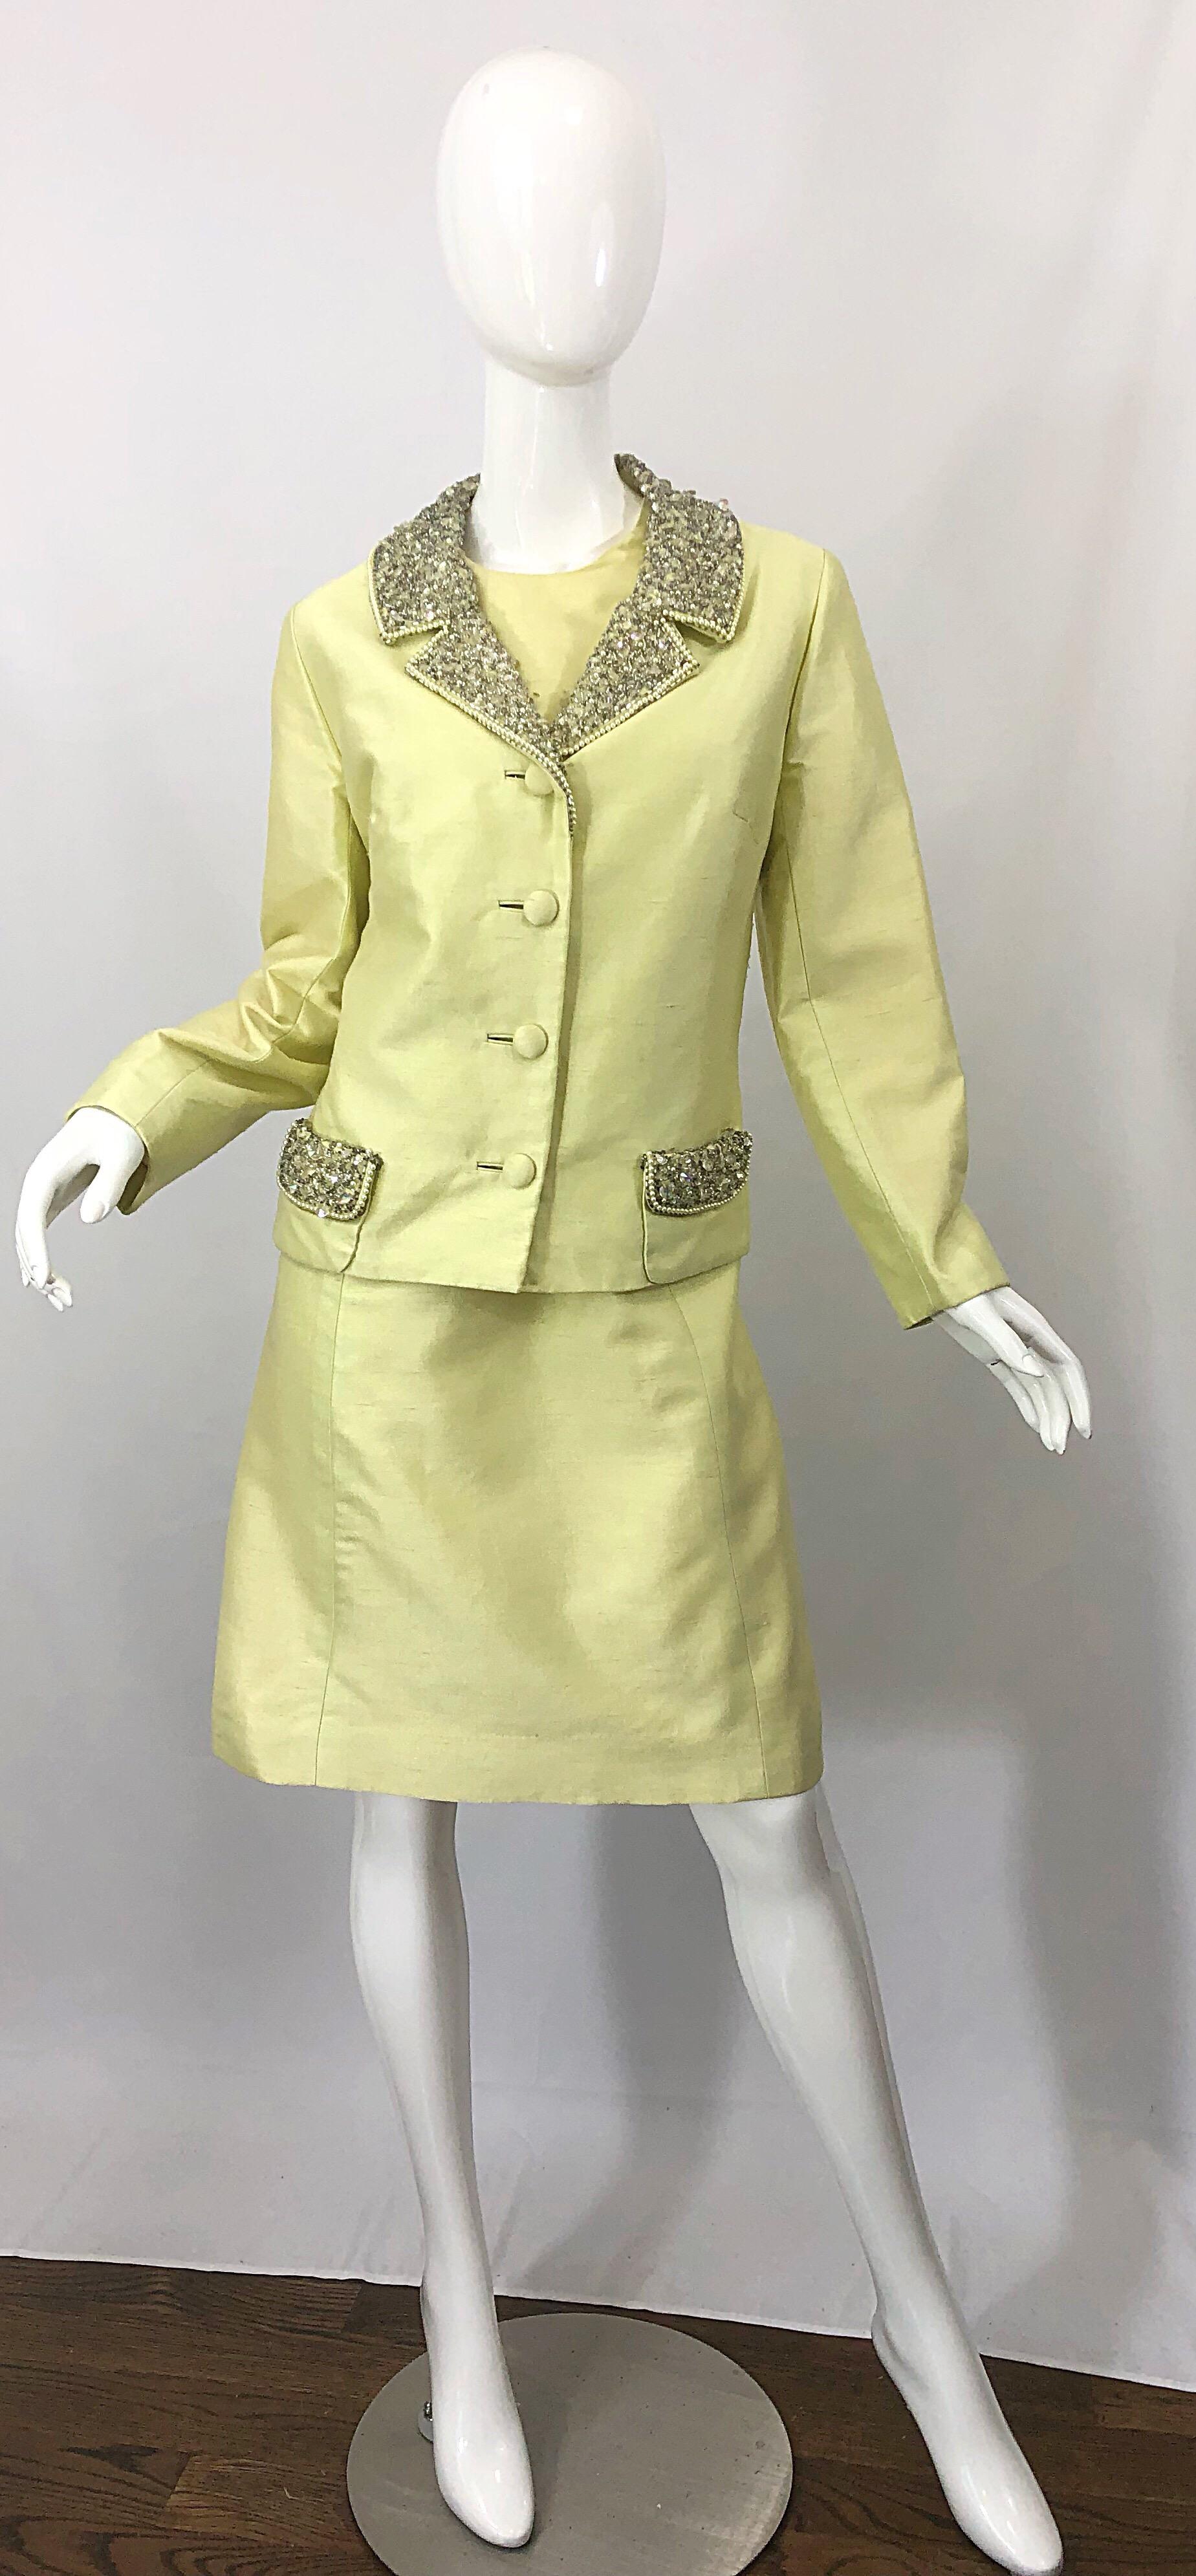 Chic vintage 1960s JACK BRYAN yellow silk shantung A-Line dress and jacket ensemble! Dress features a tailored bodice with a forgiving A-Line shape skirt. Full metal zipper up the back with hook-and-eye closure. Matching jacket has hundreds of